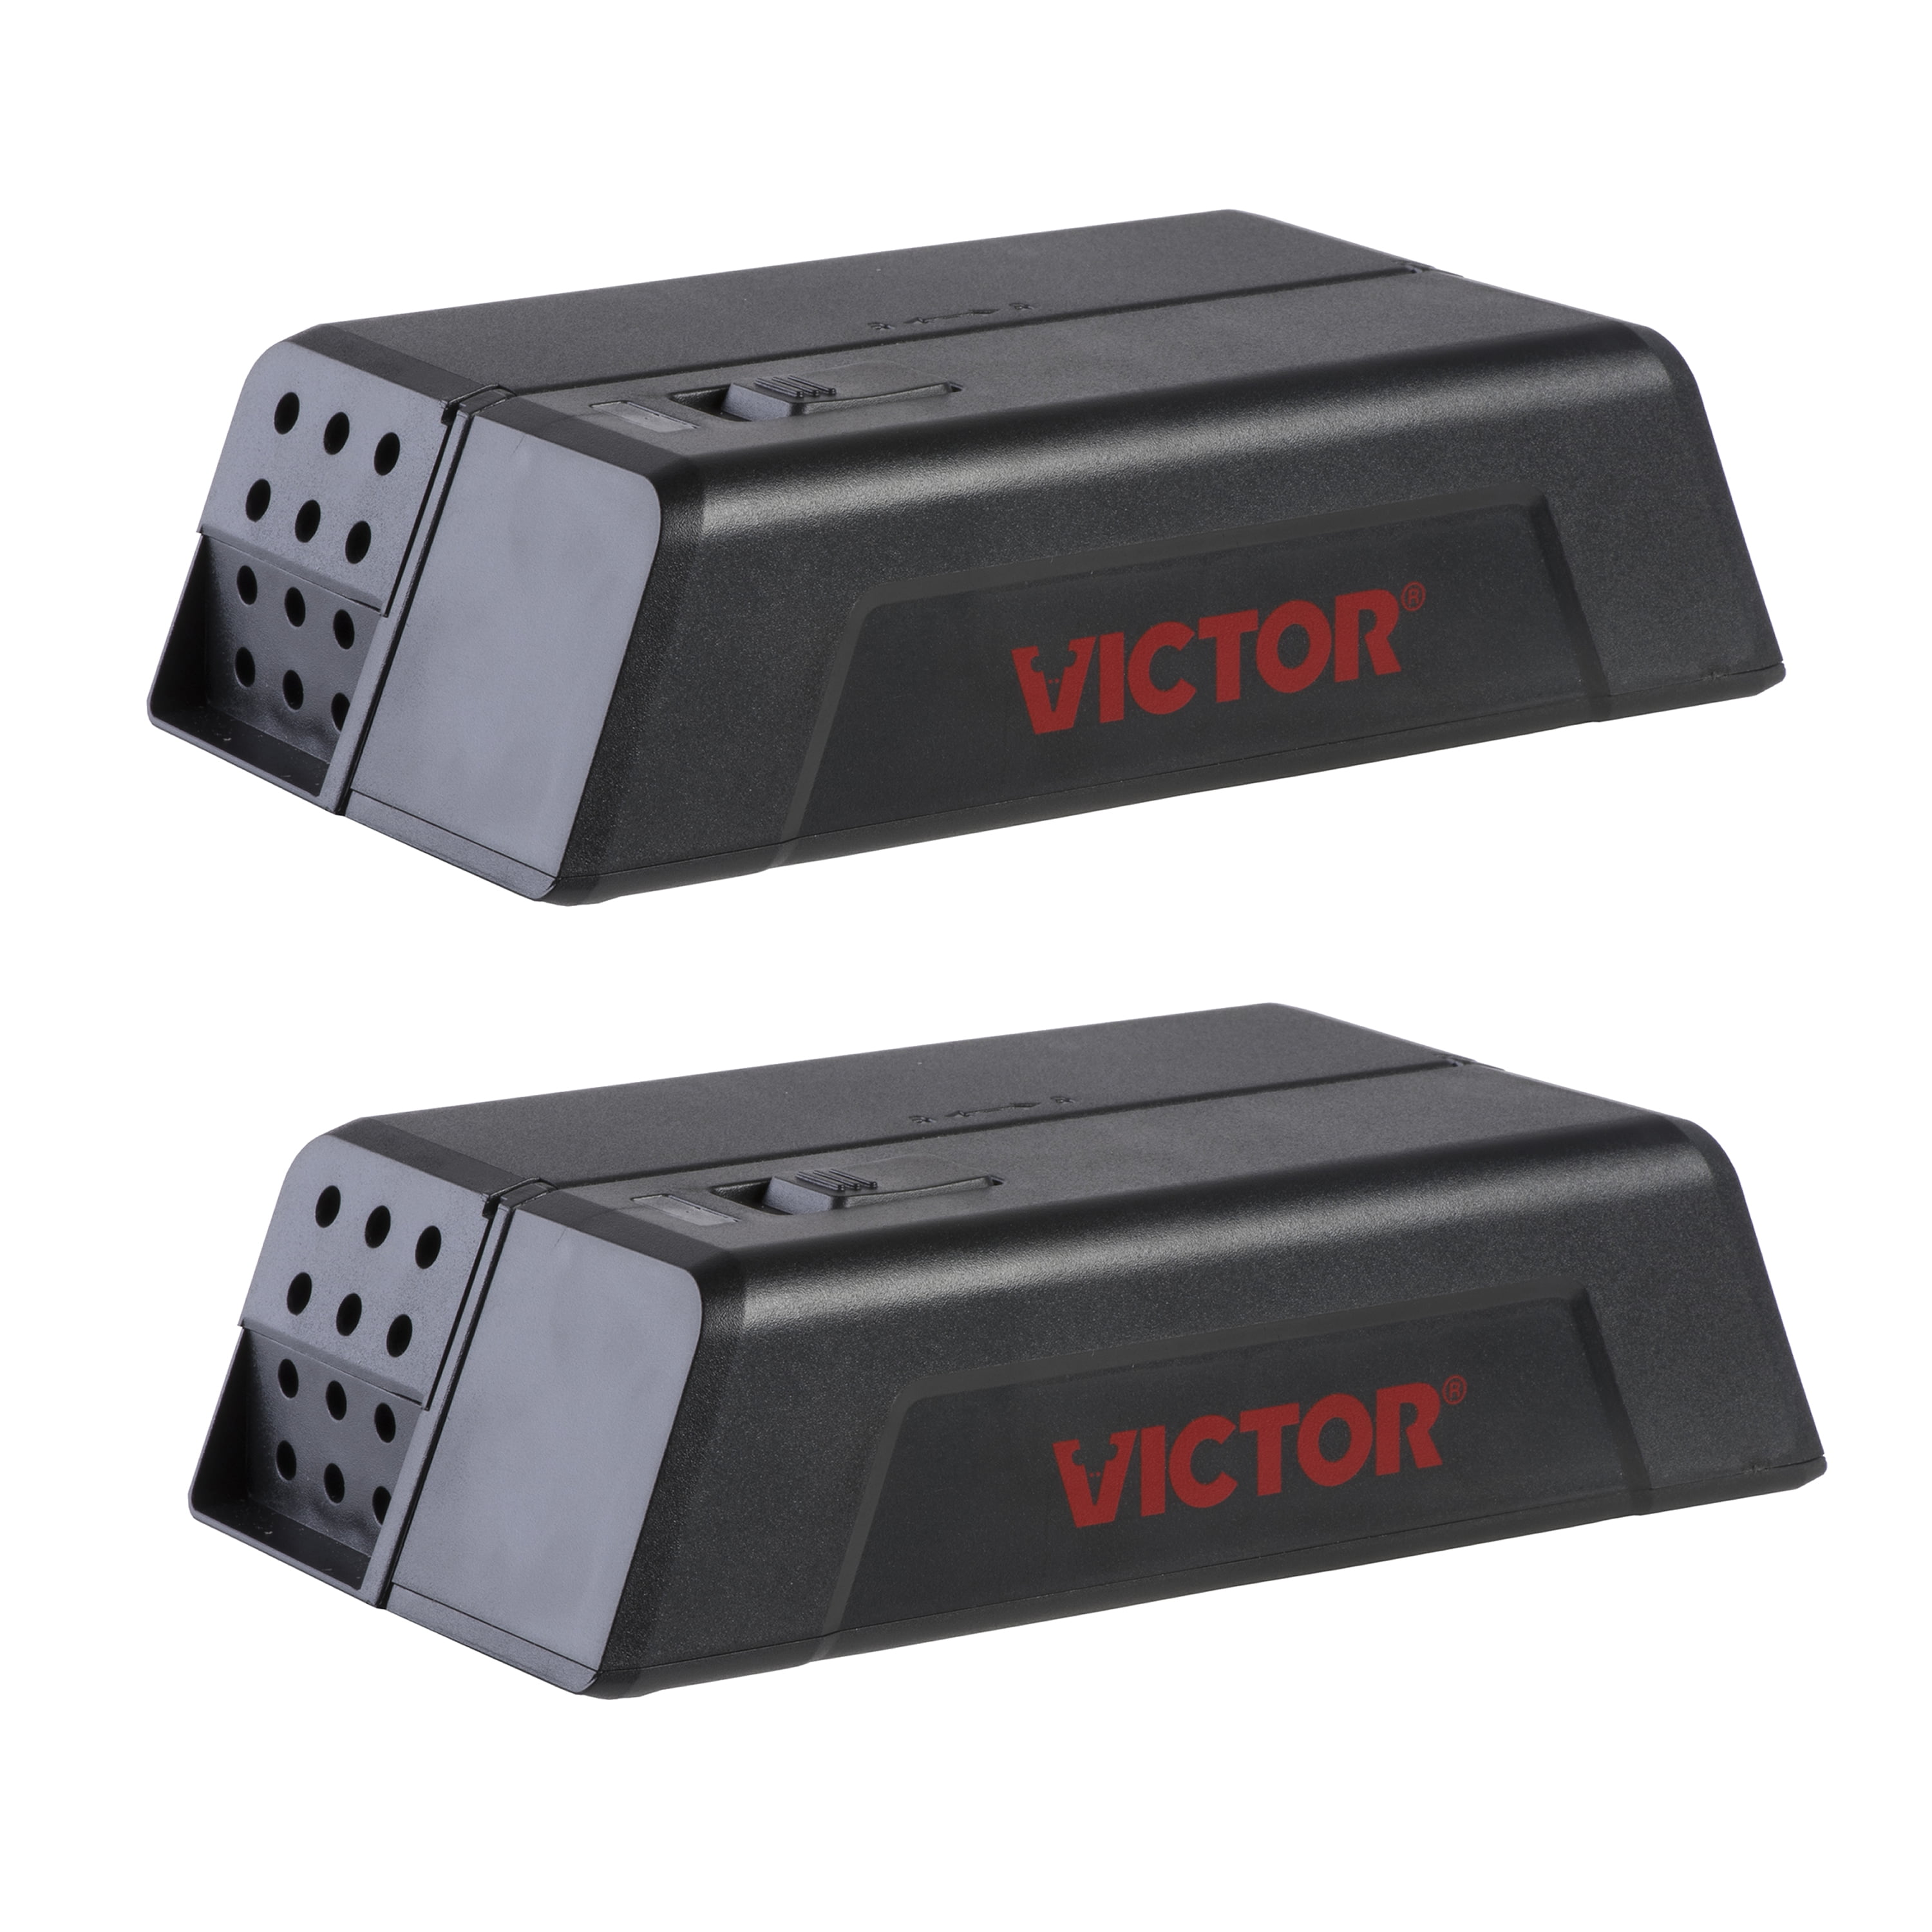  Victor M392 Power-Kill Easy Set Mouse Trap - 2